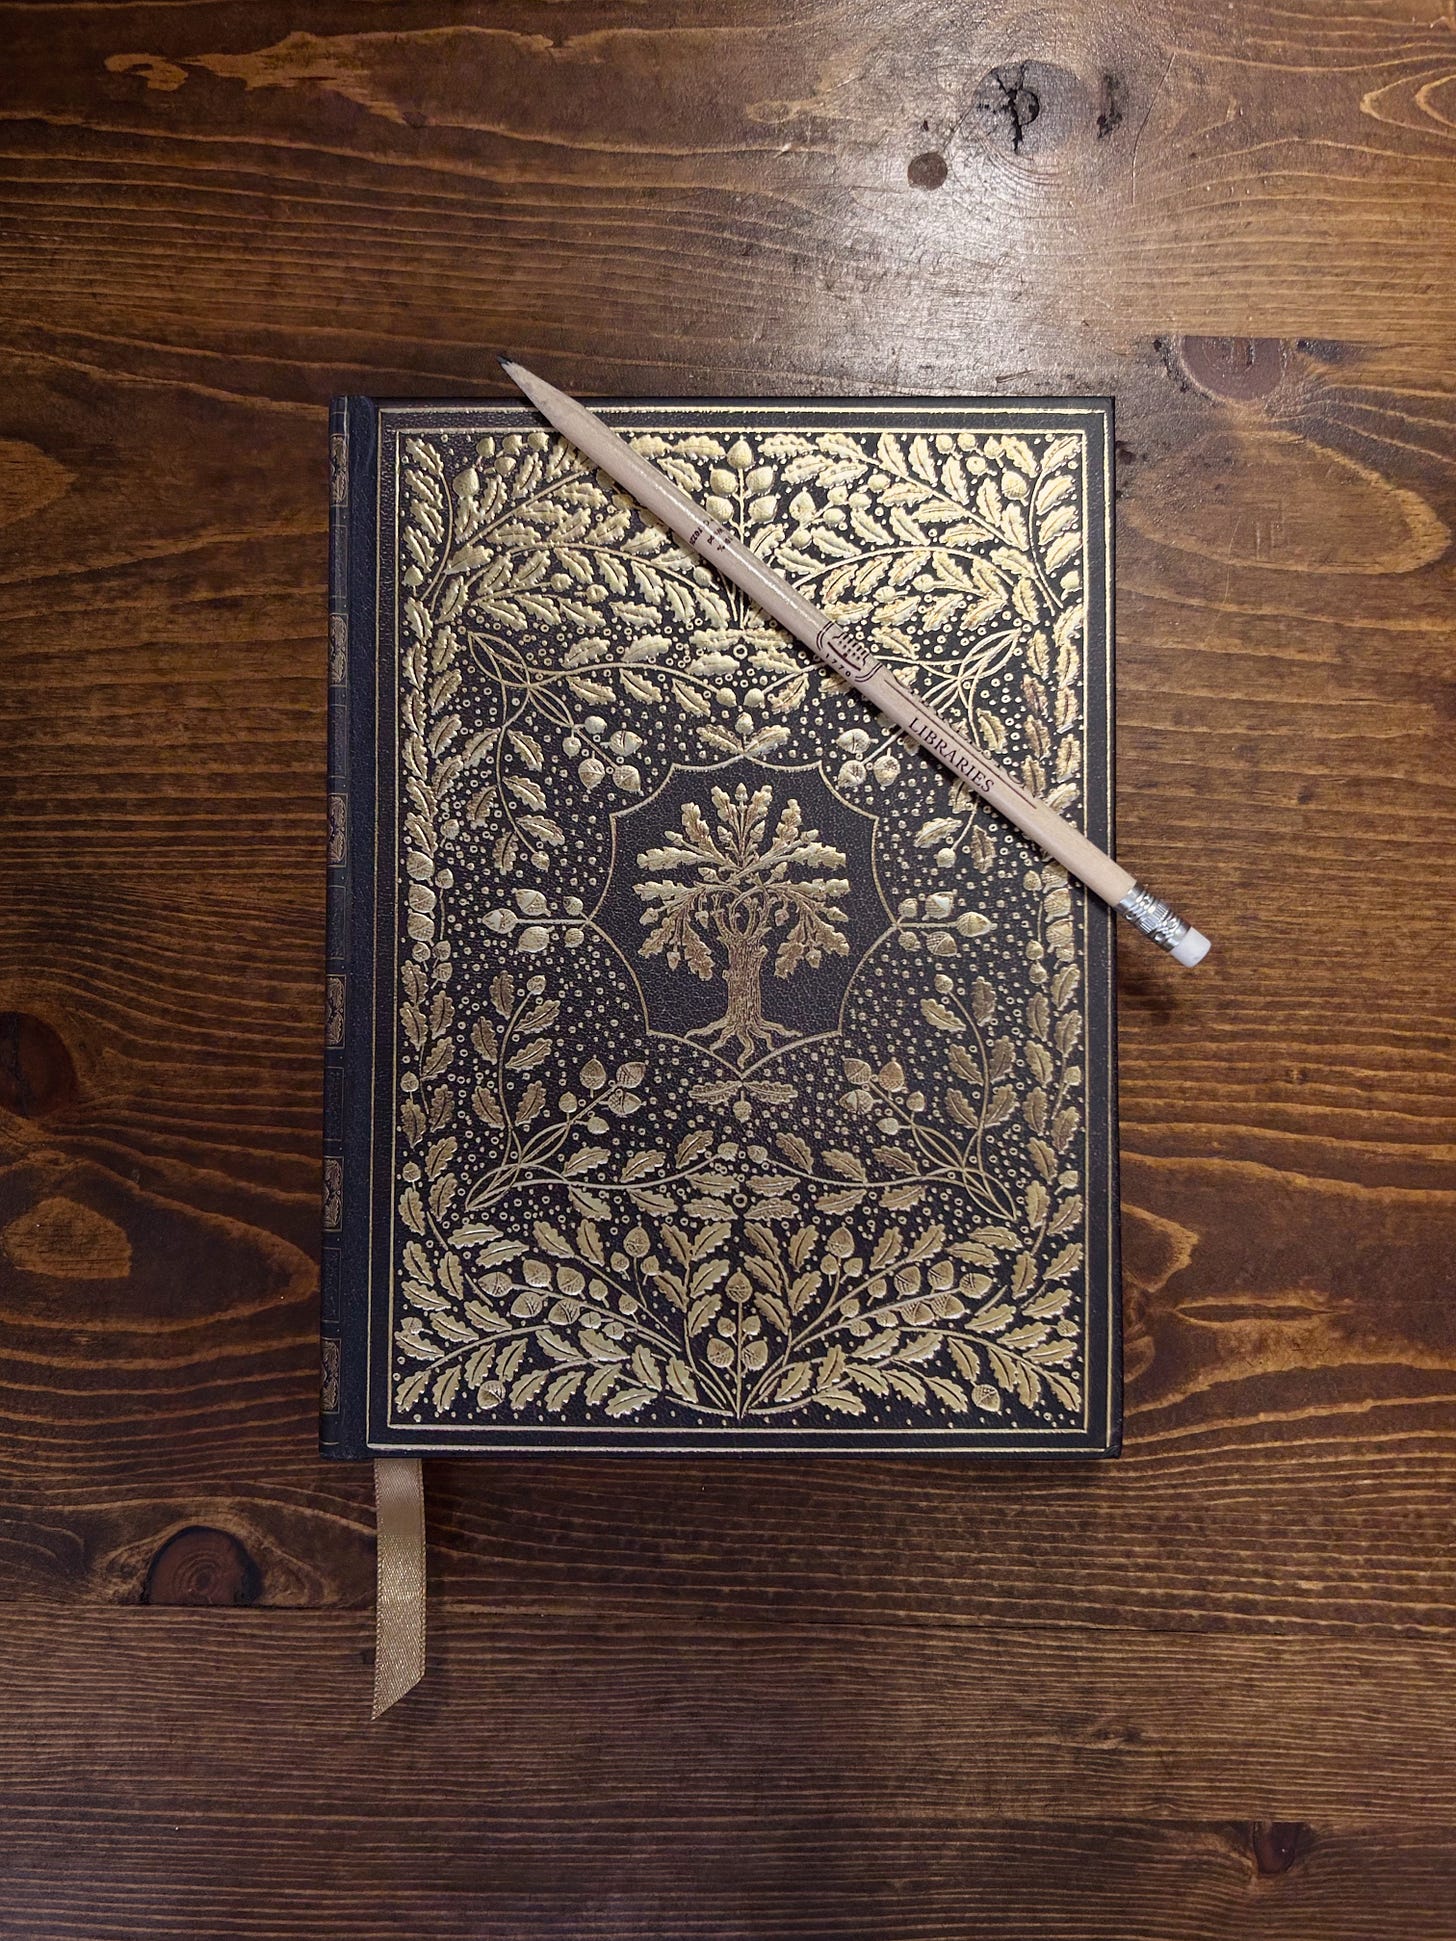 Vintage style journal with gold oak tree and leaves and natural wood pencil.